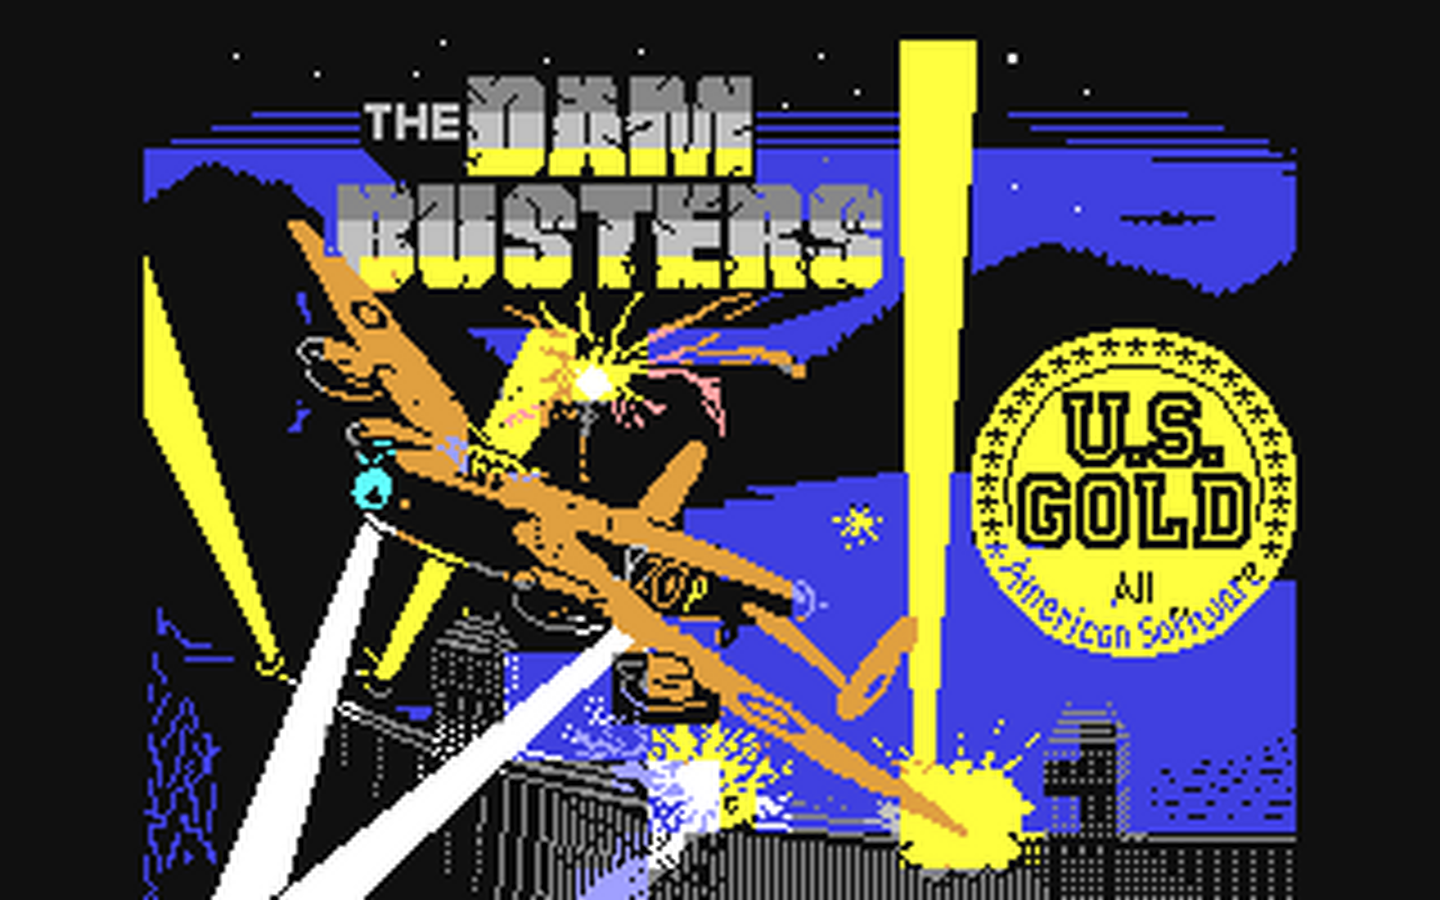 C64 GameBase Dam_Busters,_The US_Gold 1985